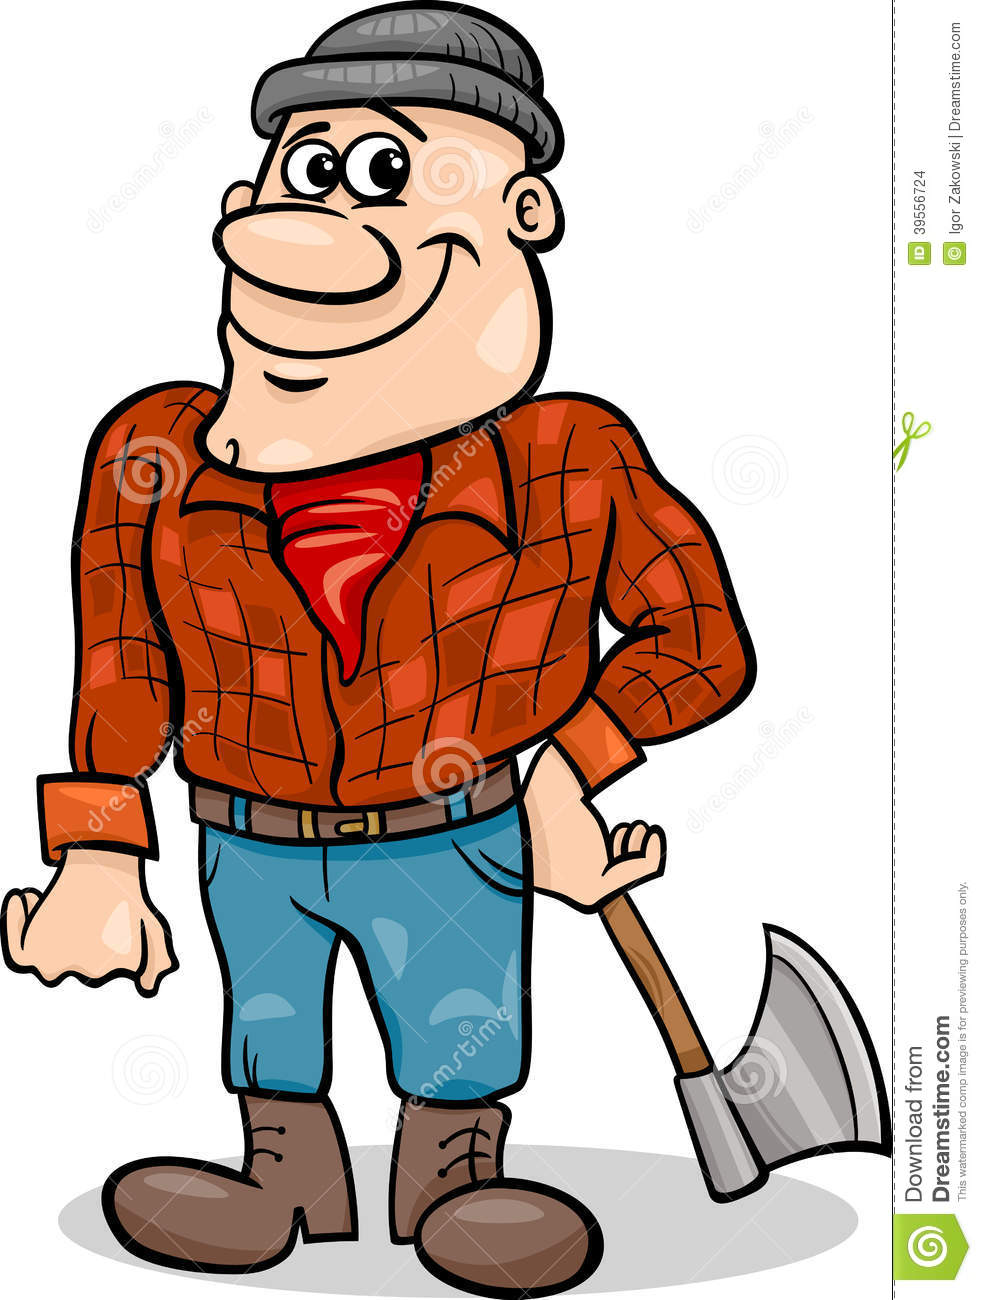 Cartoon Illustration Of Lumberjack Character From Little Red Riding